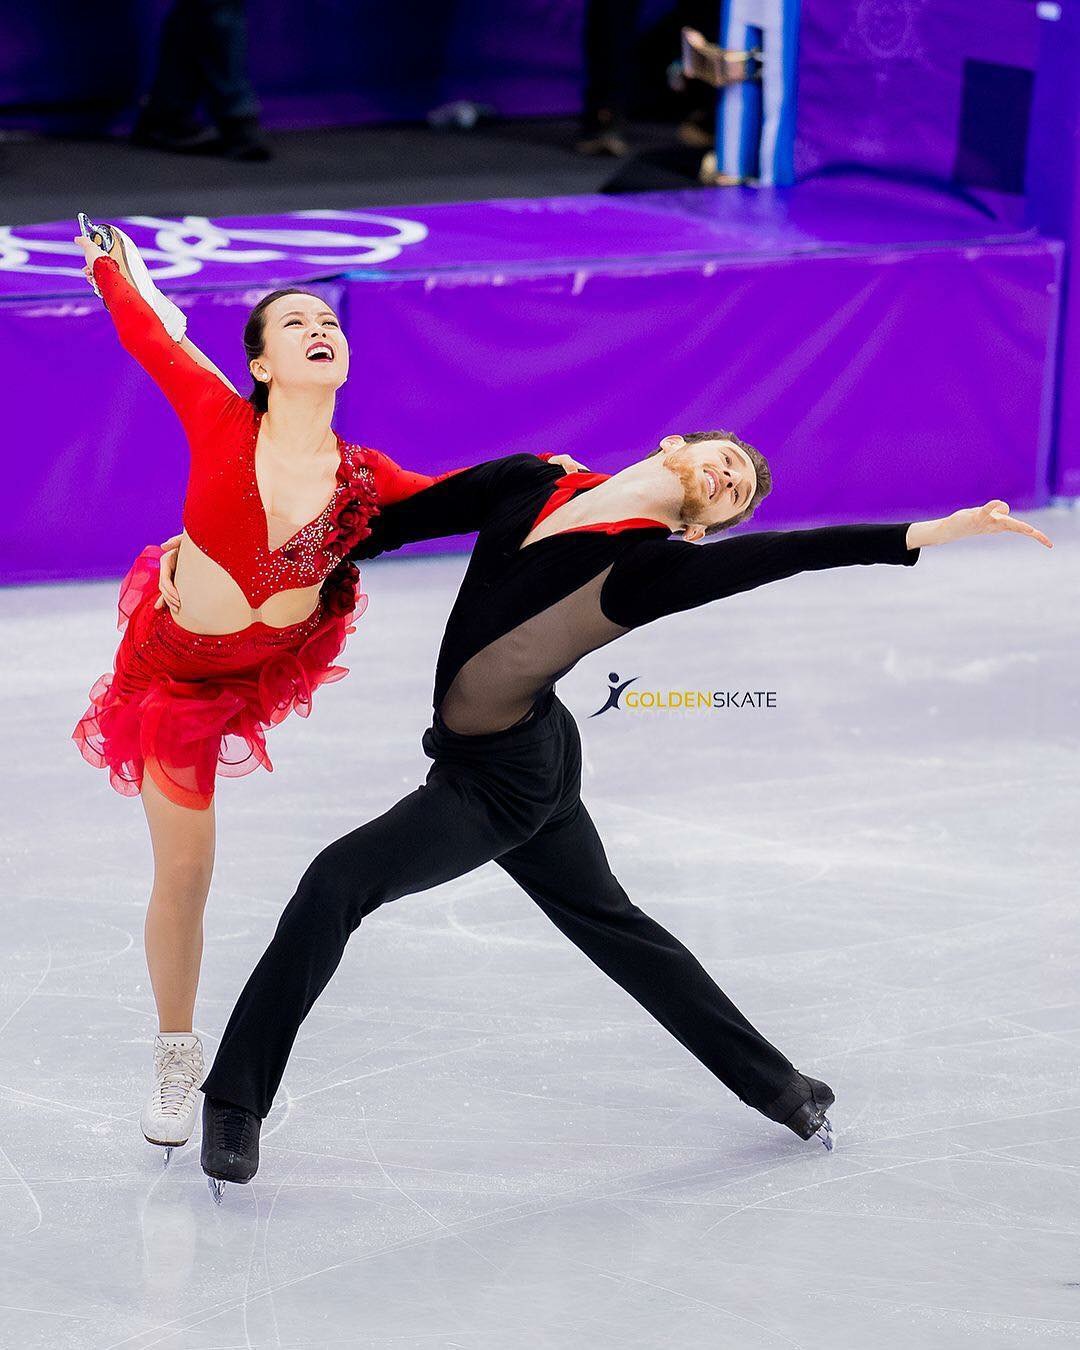 Photo of a man in woman posing while figure skating in bright, coordinating outfits